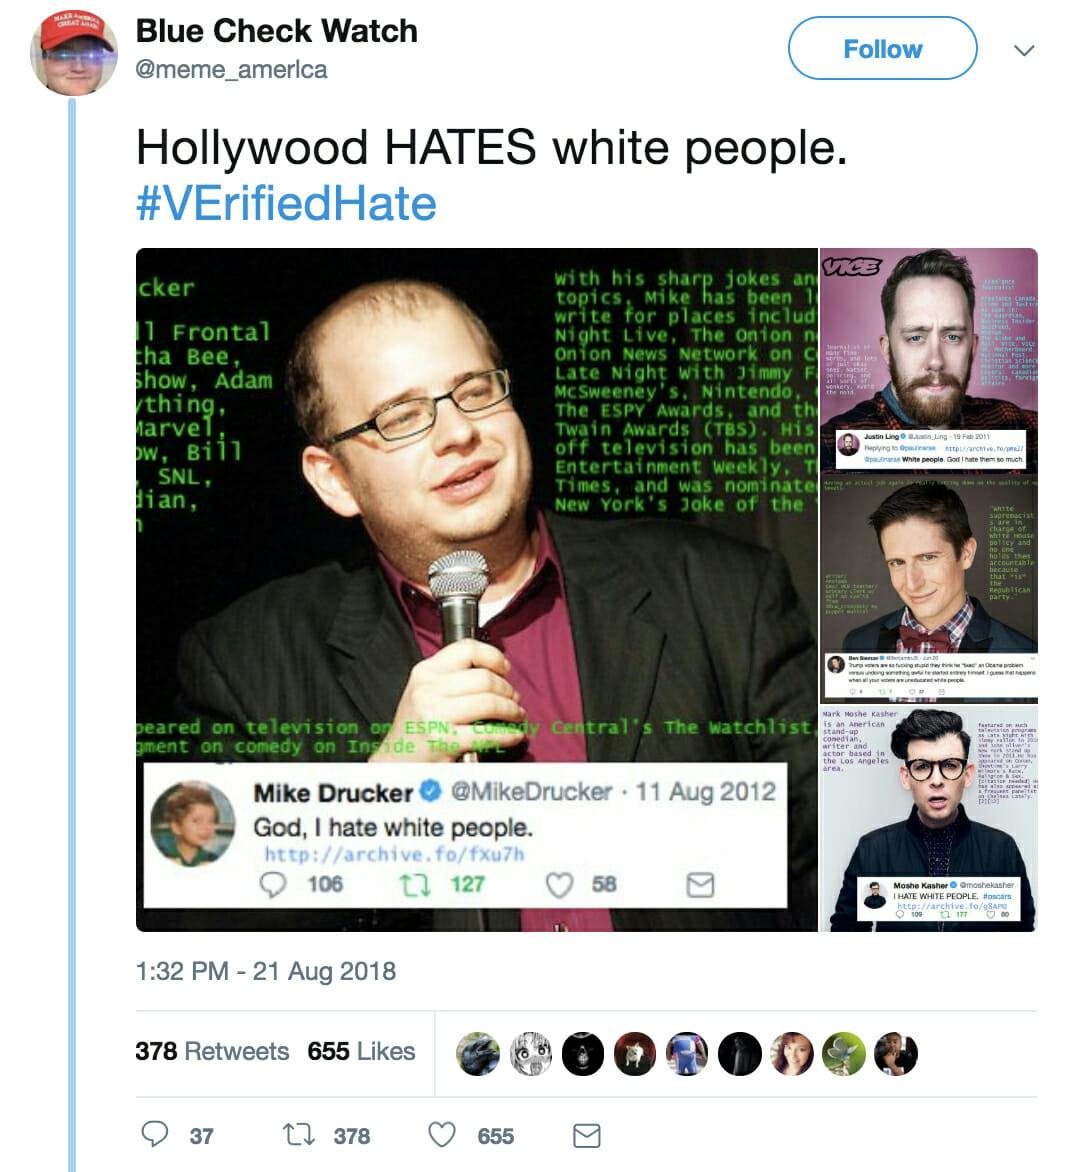 #VerifiedHate accuses verified liberal users of being racist.